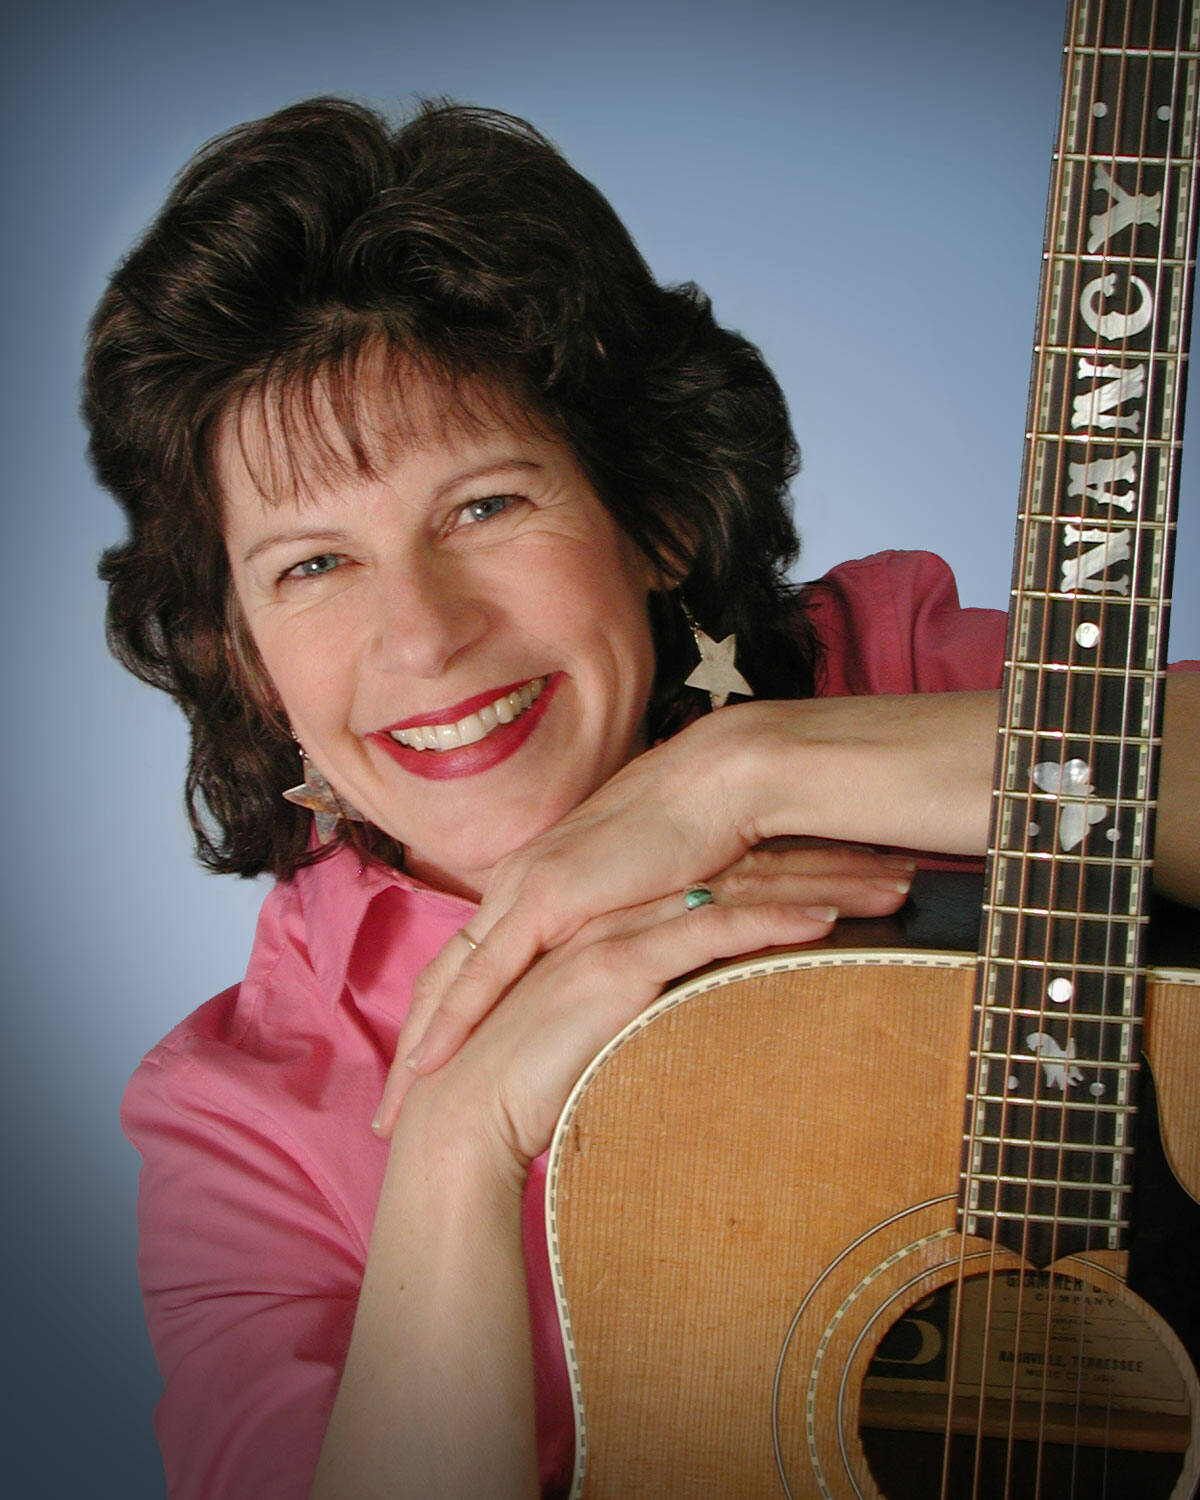 Nancy Stewart will lead the way with the return of the free family sing-alongs on Wednesdays from 6-7 p.m. throughout March at the Mercer Island Community and Event Center. Families can bring their instruments, and chords and lyrics will be provided. Dates are March 1, 8, 15, 22 and 29. For more information, visit <a href="http://www.singwithourkids.com" target="_blank">www.singwithourkids.com </a>